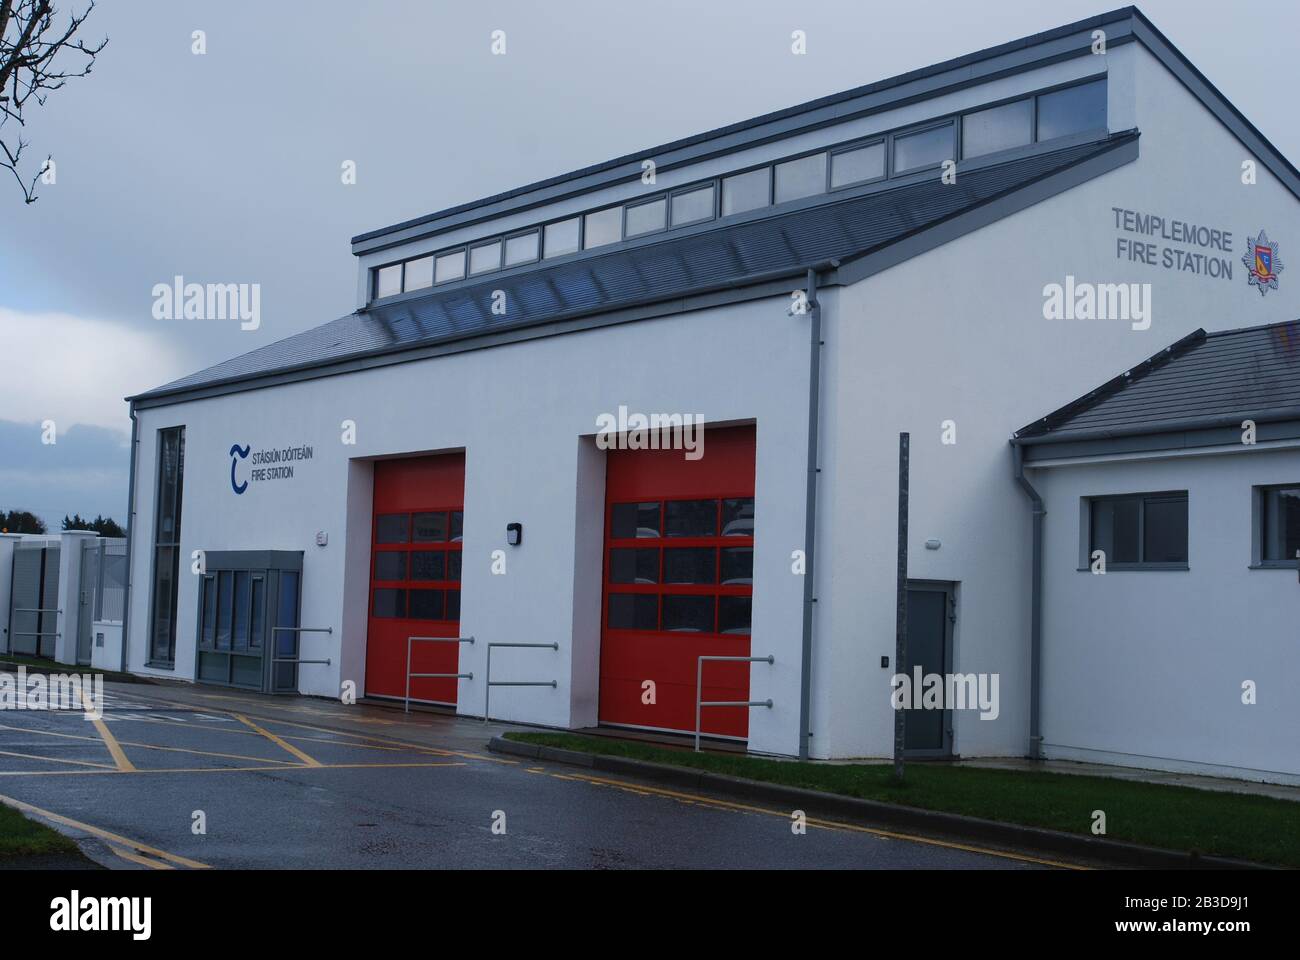 Templemore Fire Station, Templemore, Co. Tipperary, Eire Stock Photo